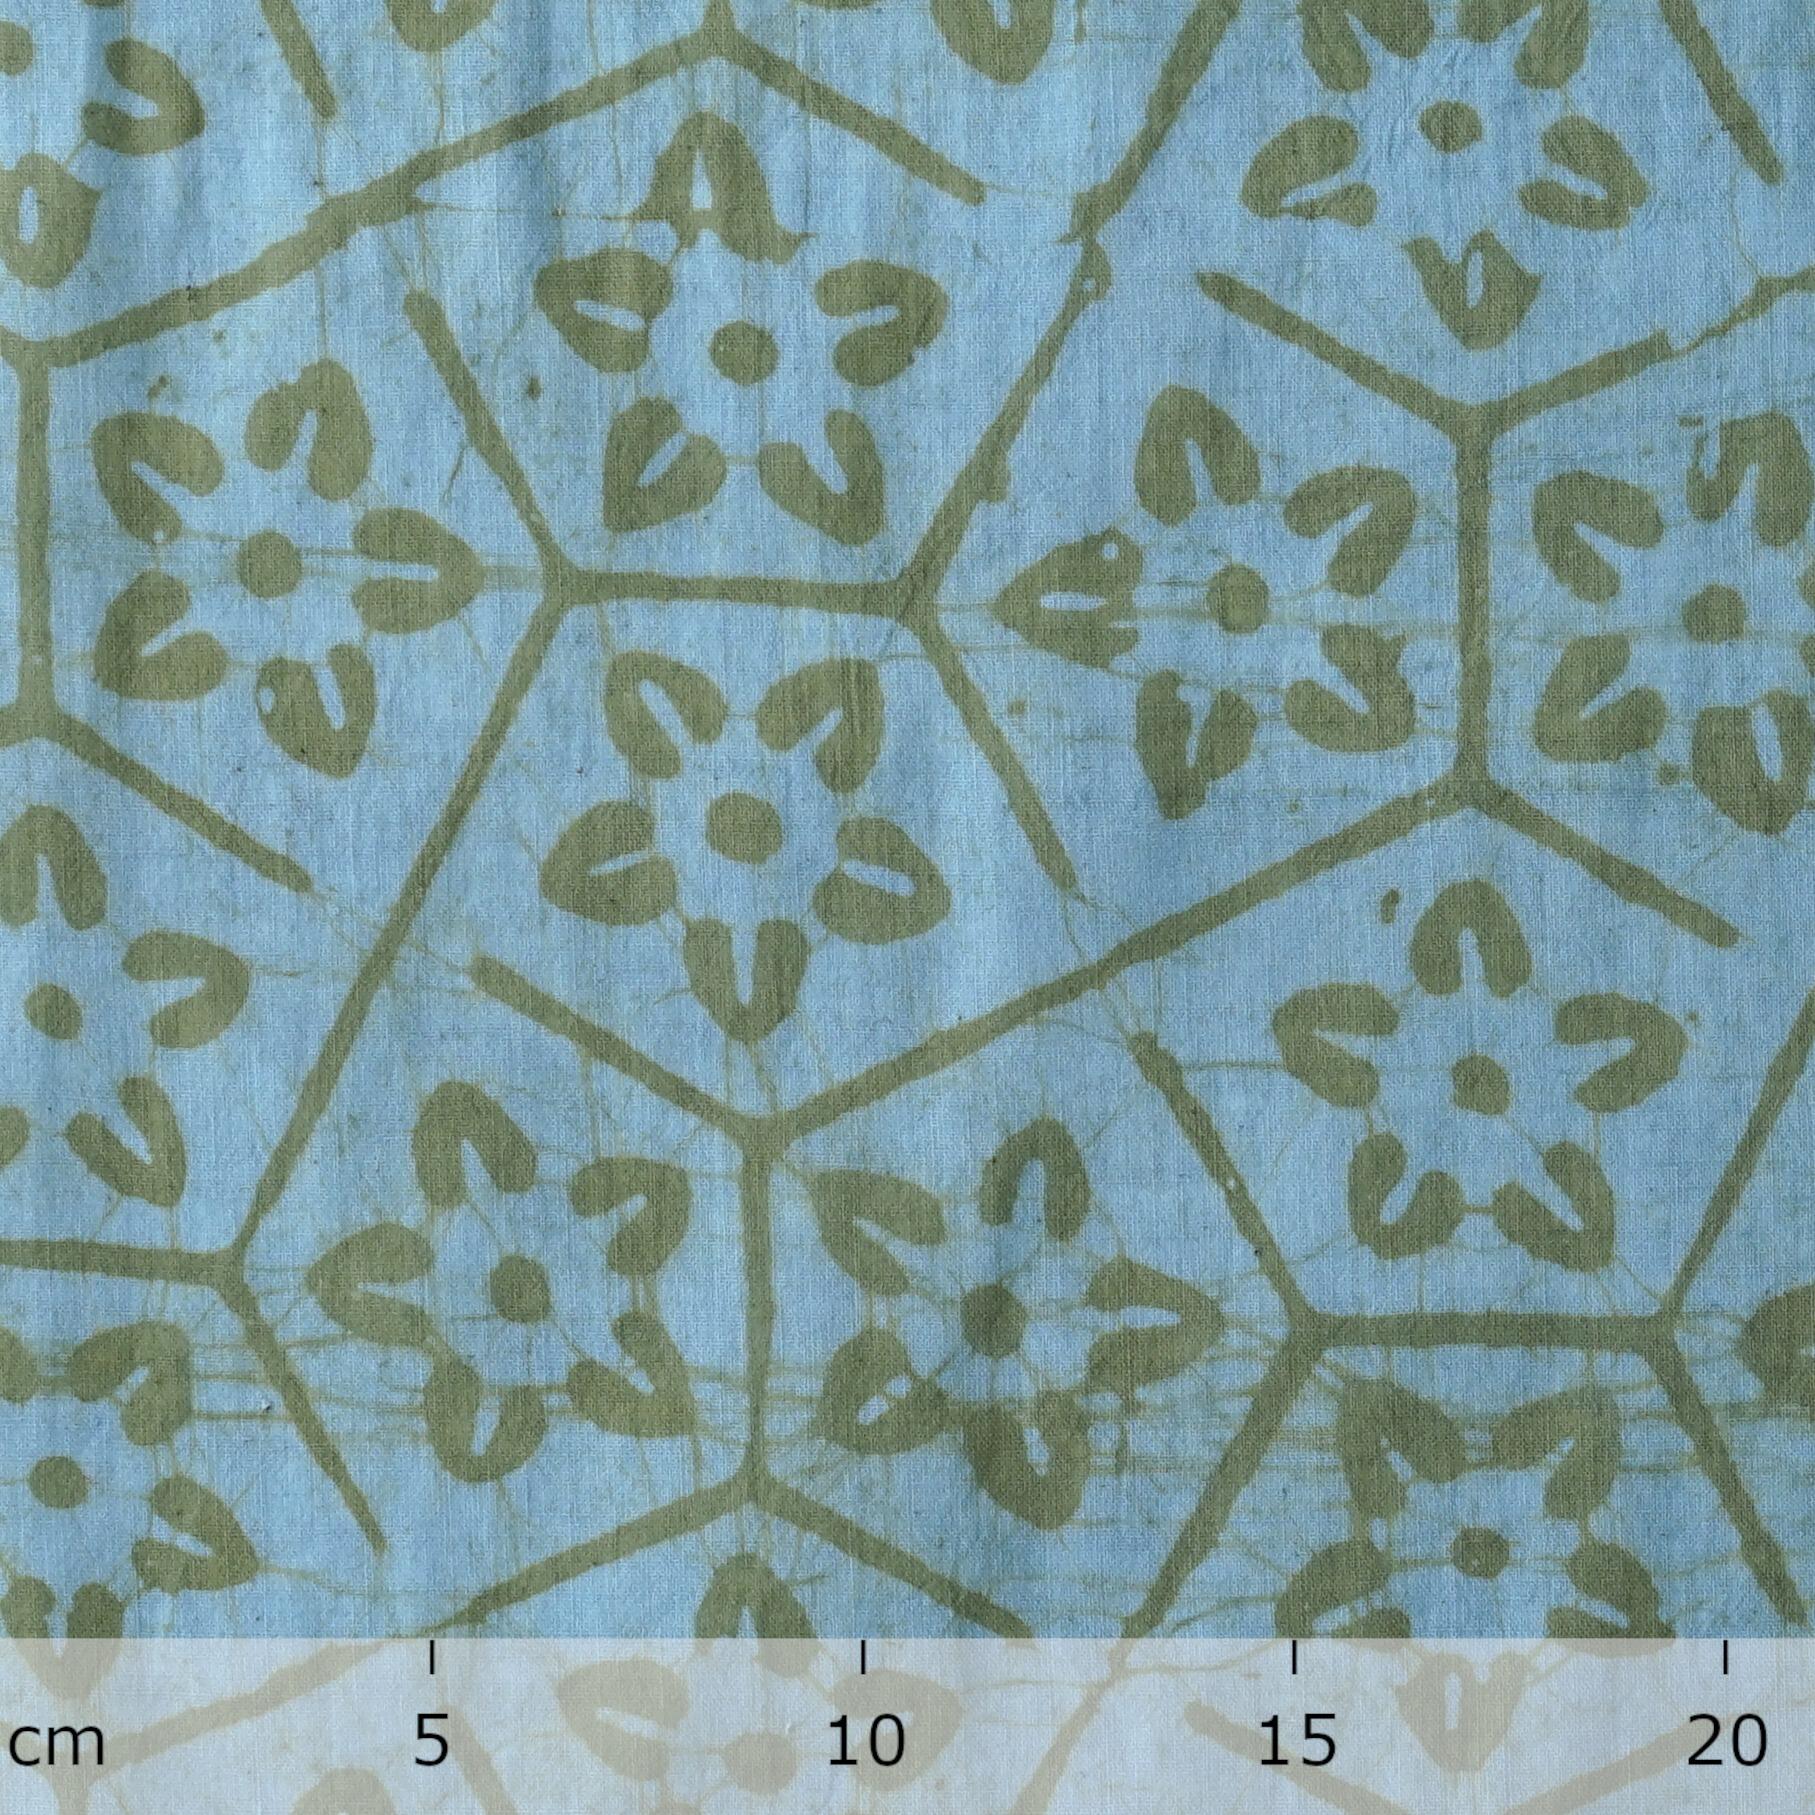 100% Block-Printed Batik Cotton Fabric From India - Candy Fossil Design - Reactive Dye - Ruler